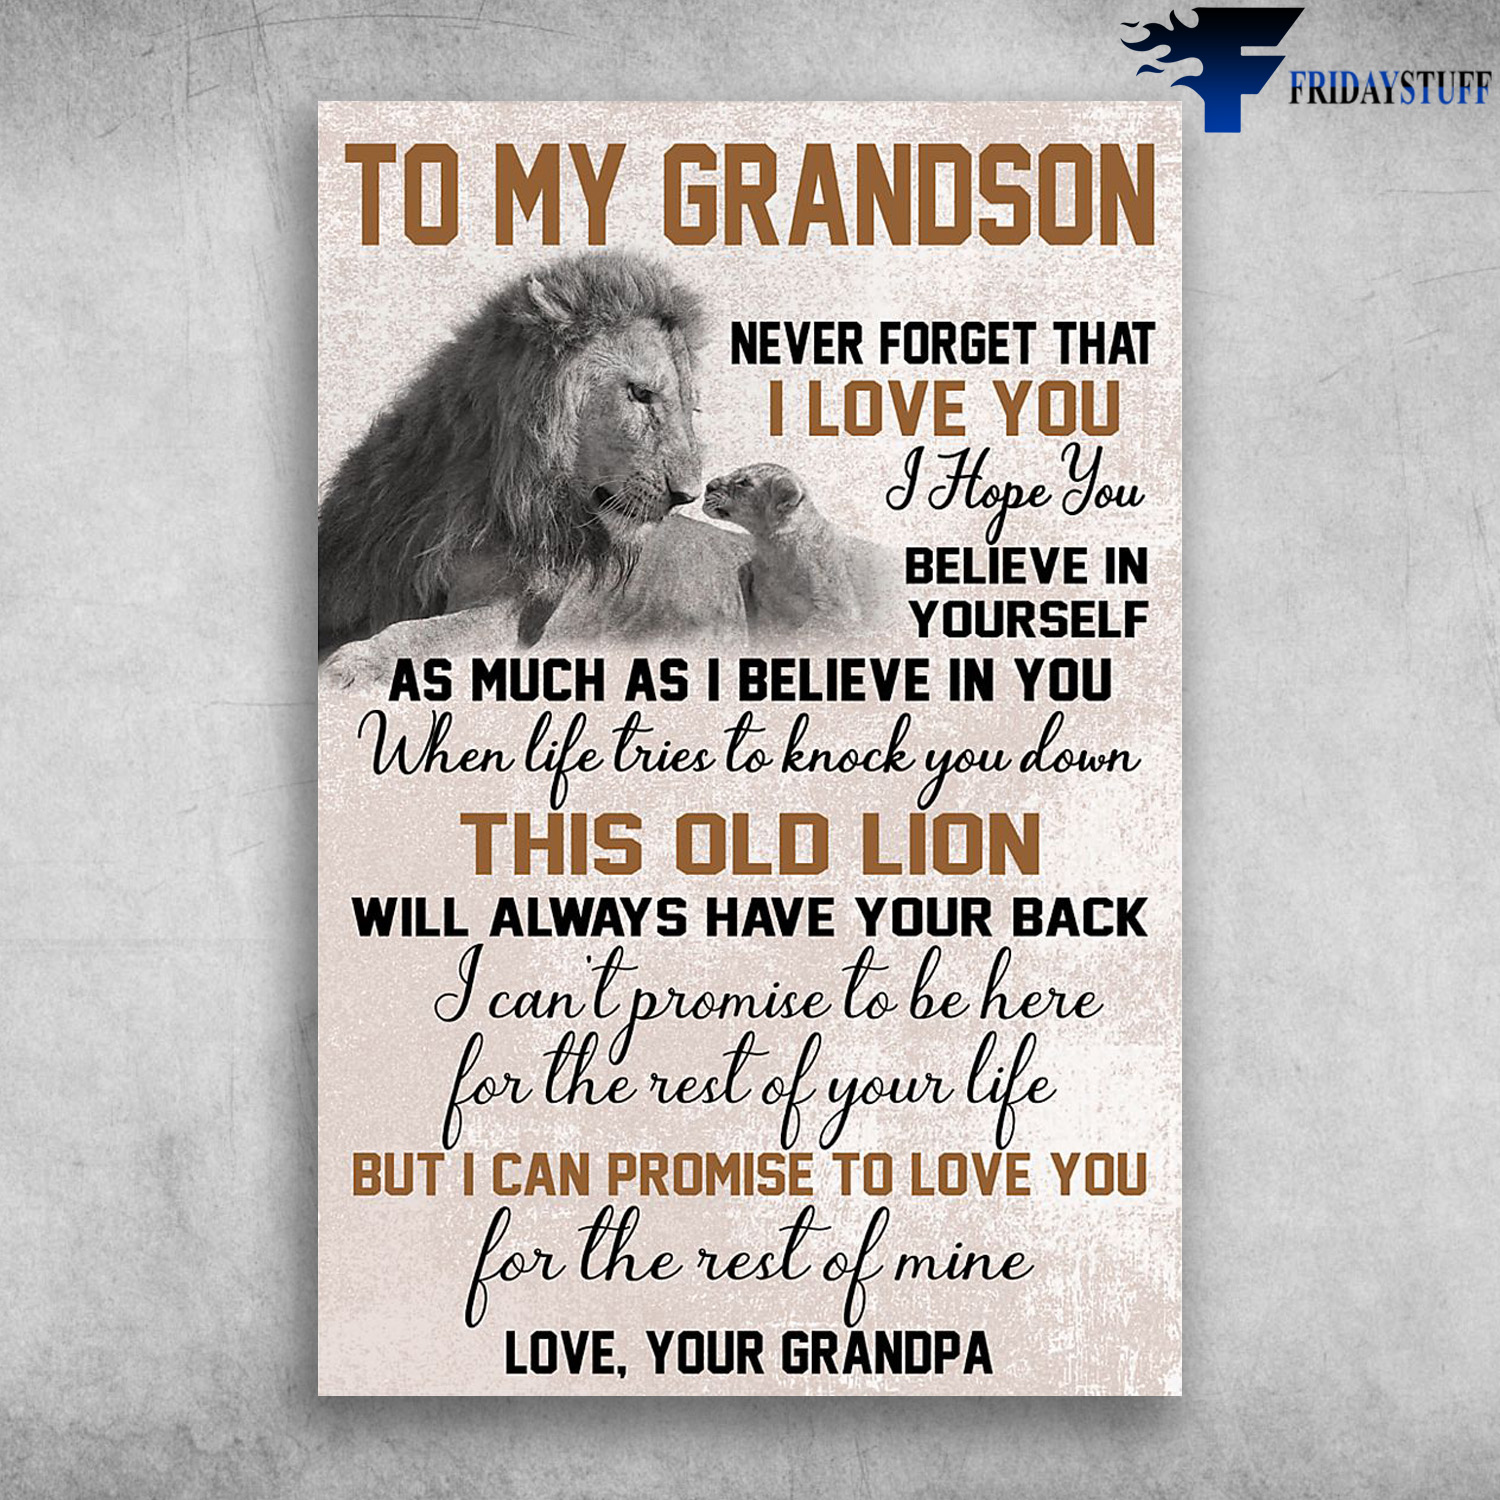 To My Grandson Never Forget That I Love You I Hope You Believe In Yourself Love Your Grandpa